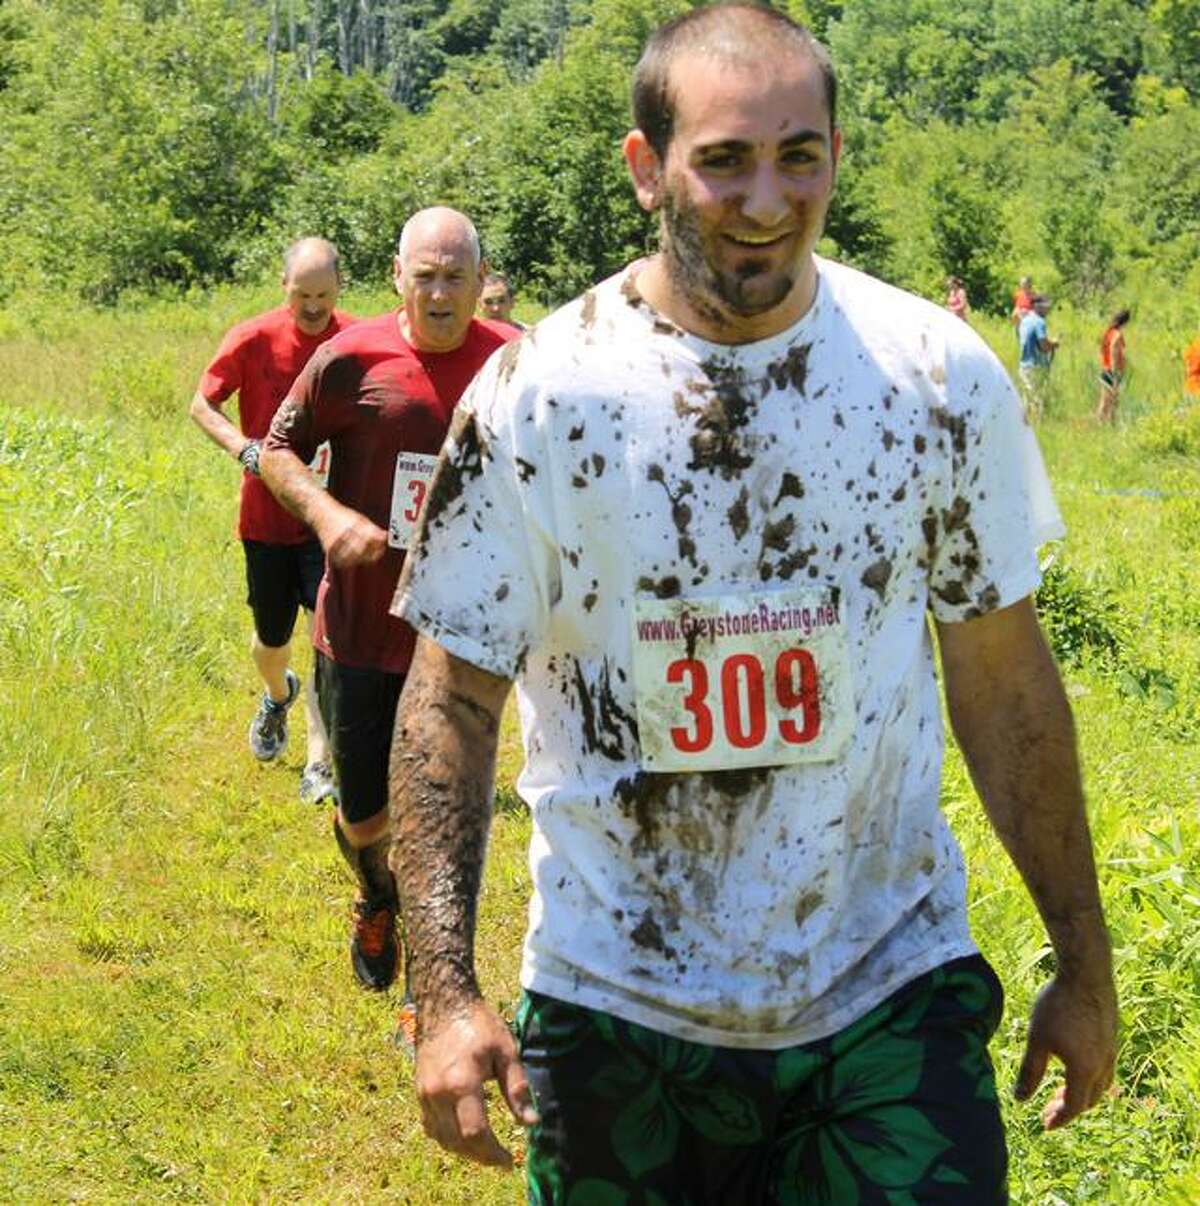 MATT DeRIENZO/ Register Citizen Participants of the first-ever Wyld Mud Run 5K got a little dirty Saturday at John A. Minetto State Park after crawling through mud, running and swimming through water, climbing walls and racing around the wooded trails. The race tested both endurance and strength, while allowing racers to have some fun and benefit the Northwest Connecticut YMCA.